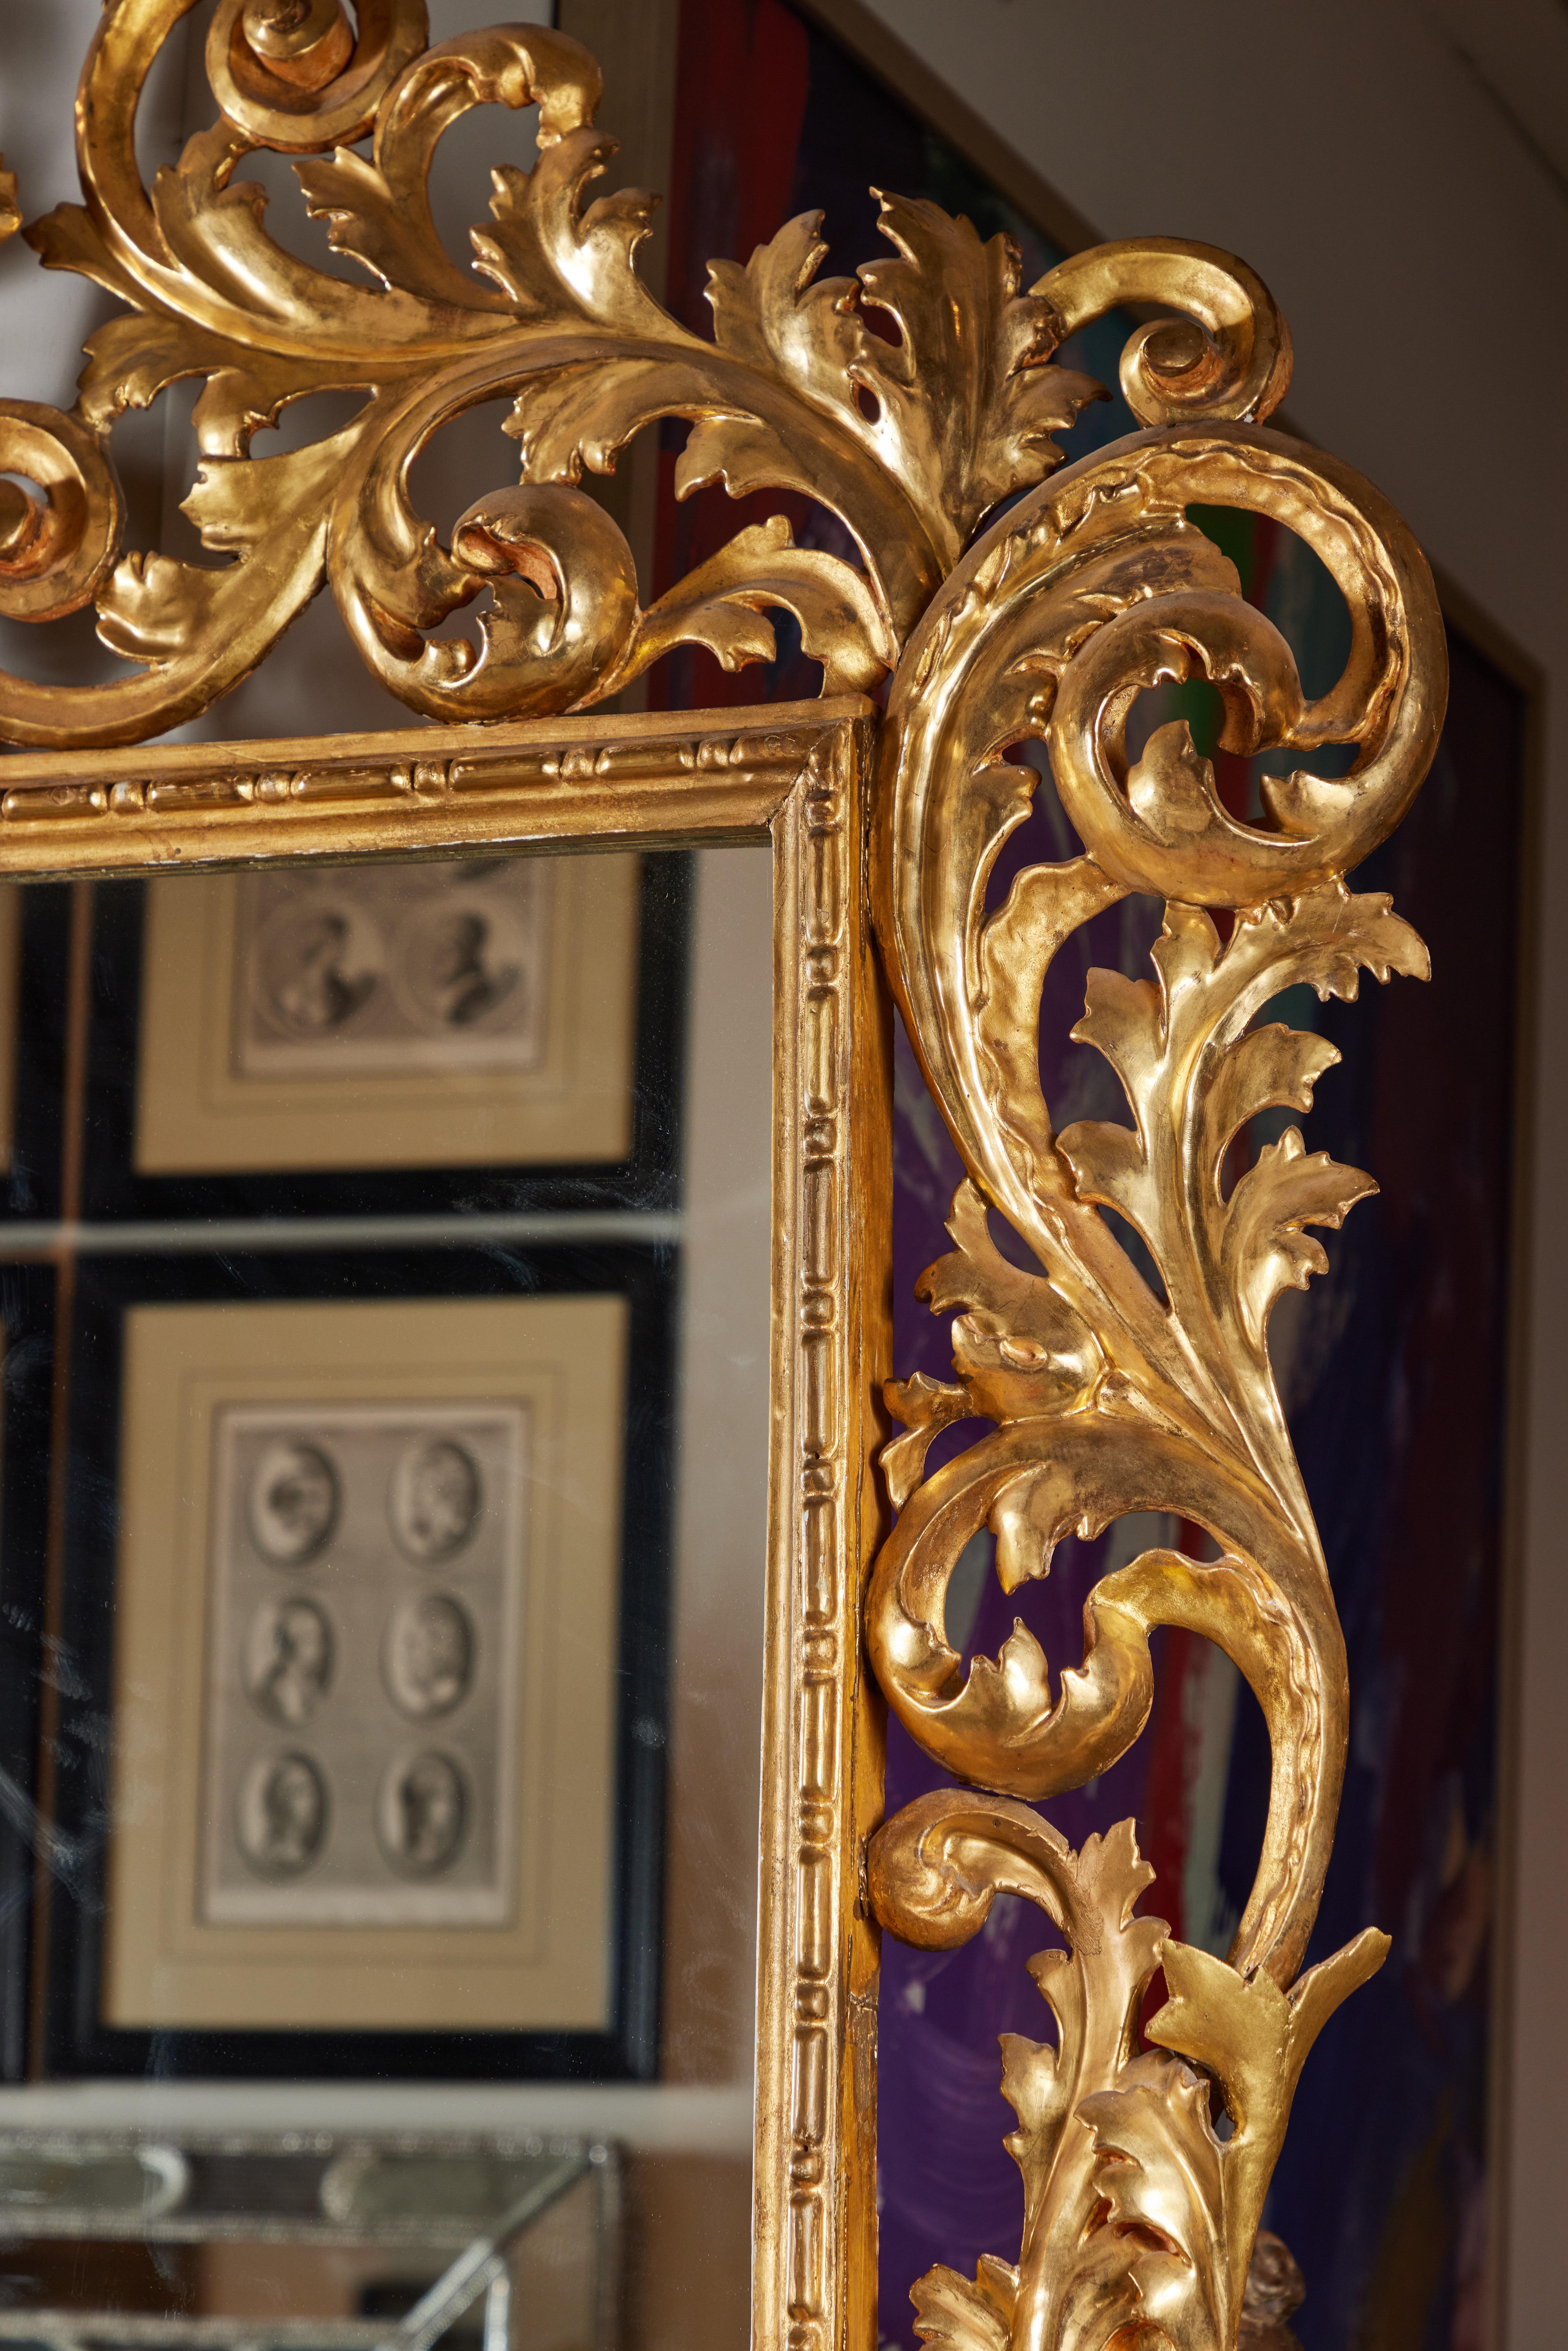 Large-scale, hand-carved and 22k gold gilded Florentine frame inset with newer glass. The dramatic, serpentine, foliate form frame rises to a beautiful crown centered on a relief-carved urn filled with blossoms and leaves.